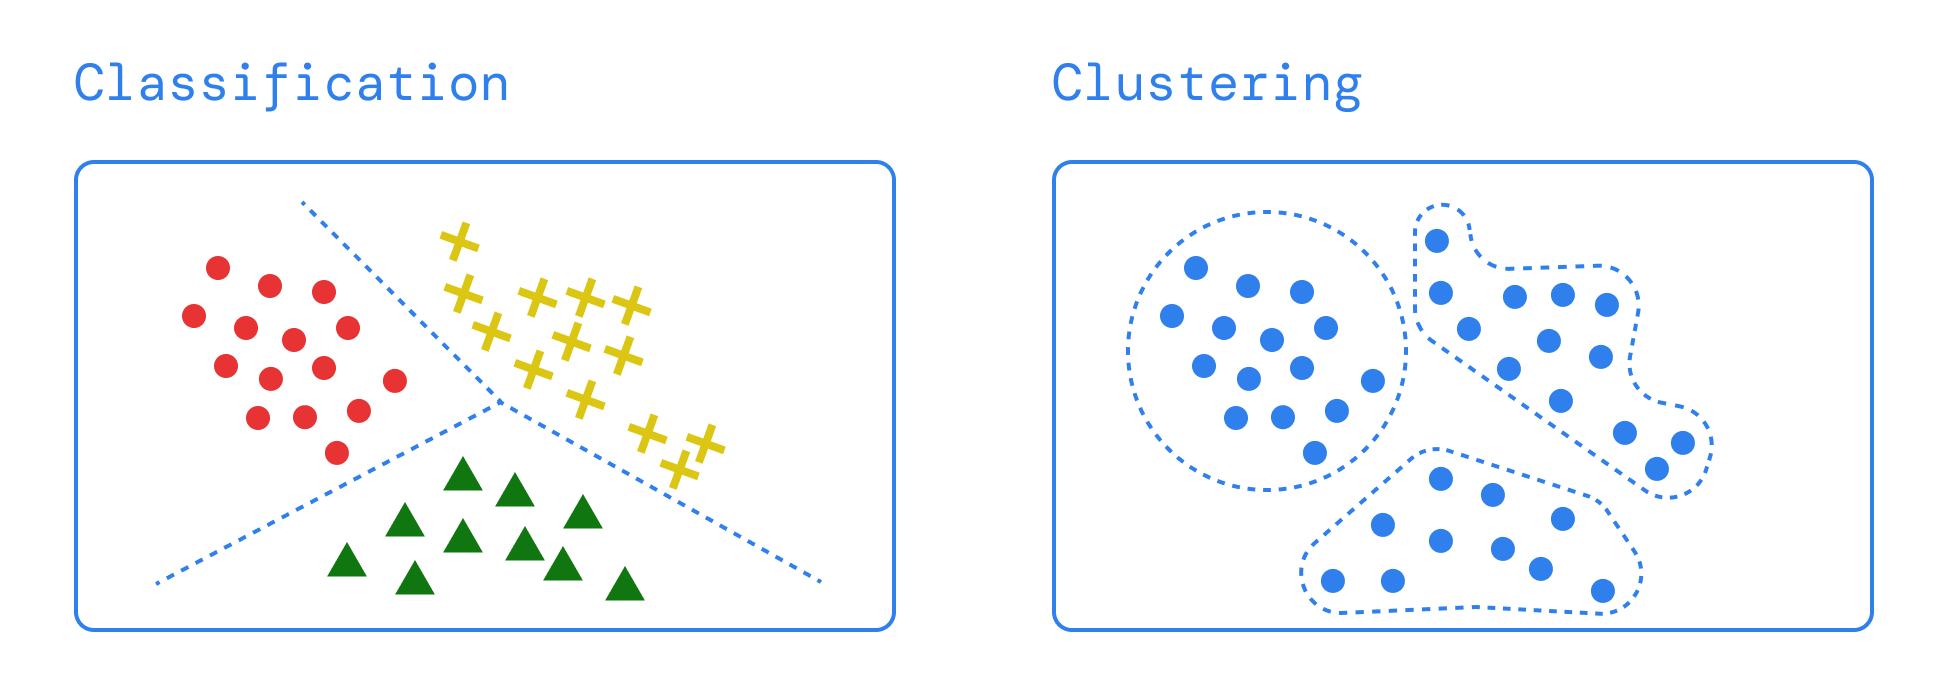 Classification or Clustering